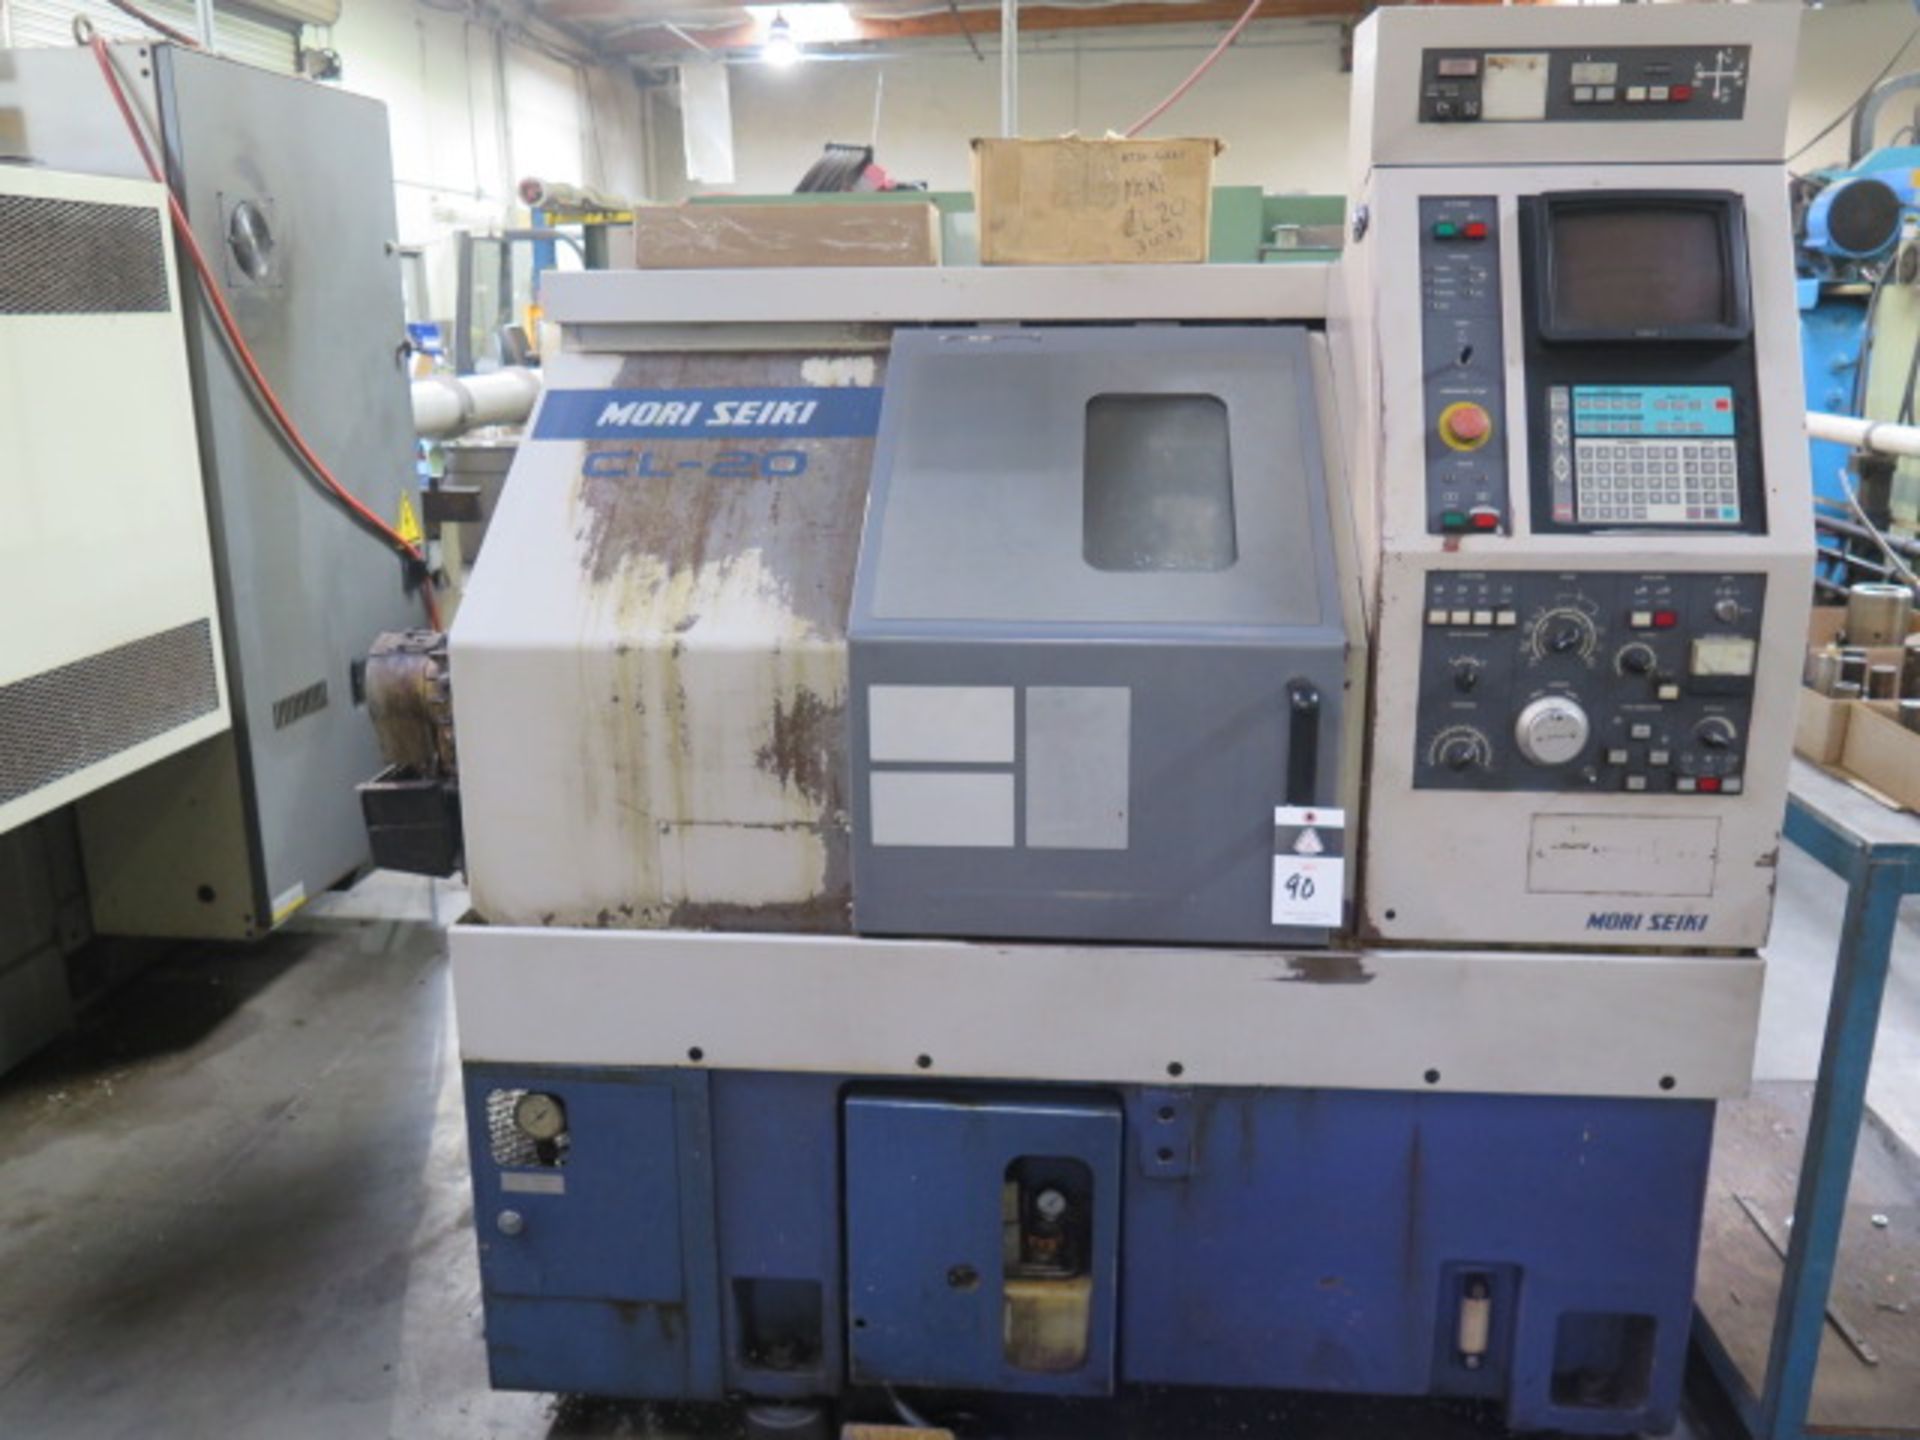 Mori Seiki CL-20A CNC Lathe s/n 544 w/ Yasnac Controls, Tool Presetter, 10-Station, SOLD AS IS